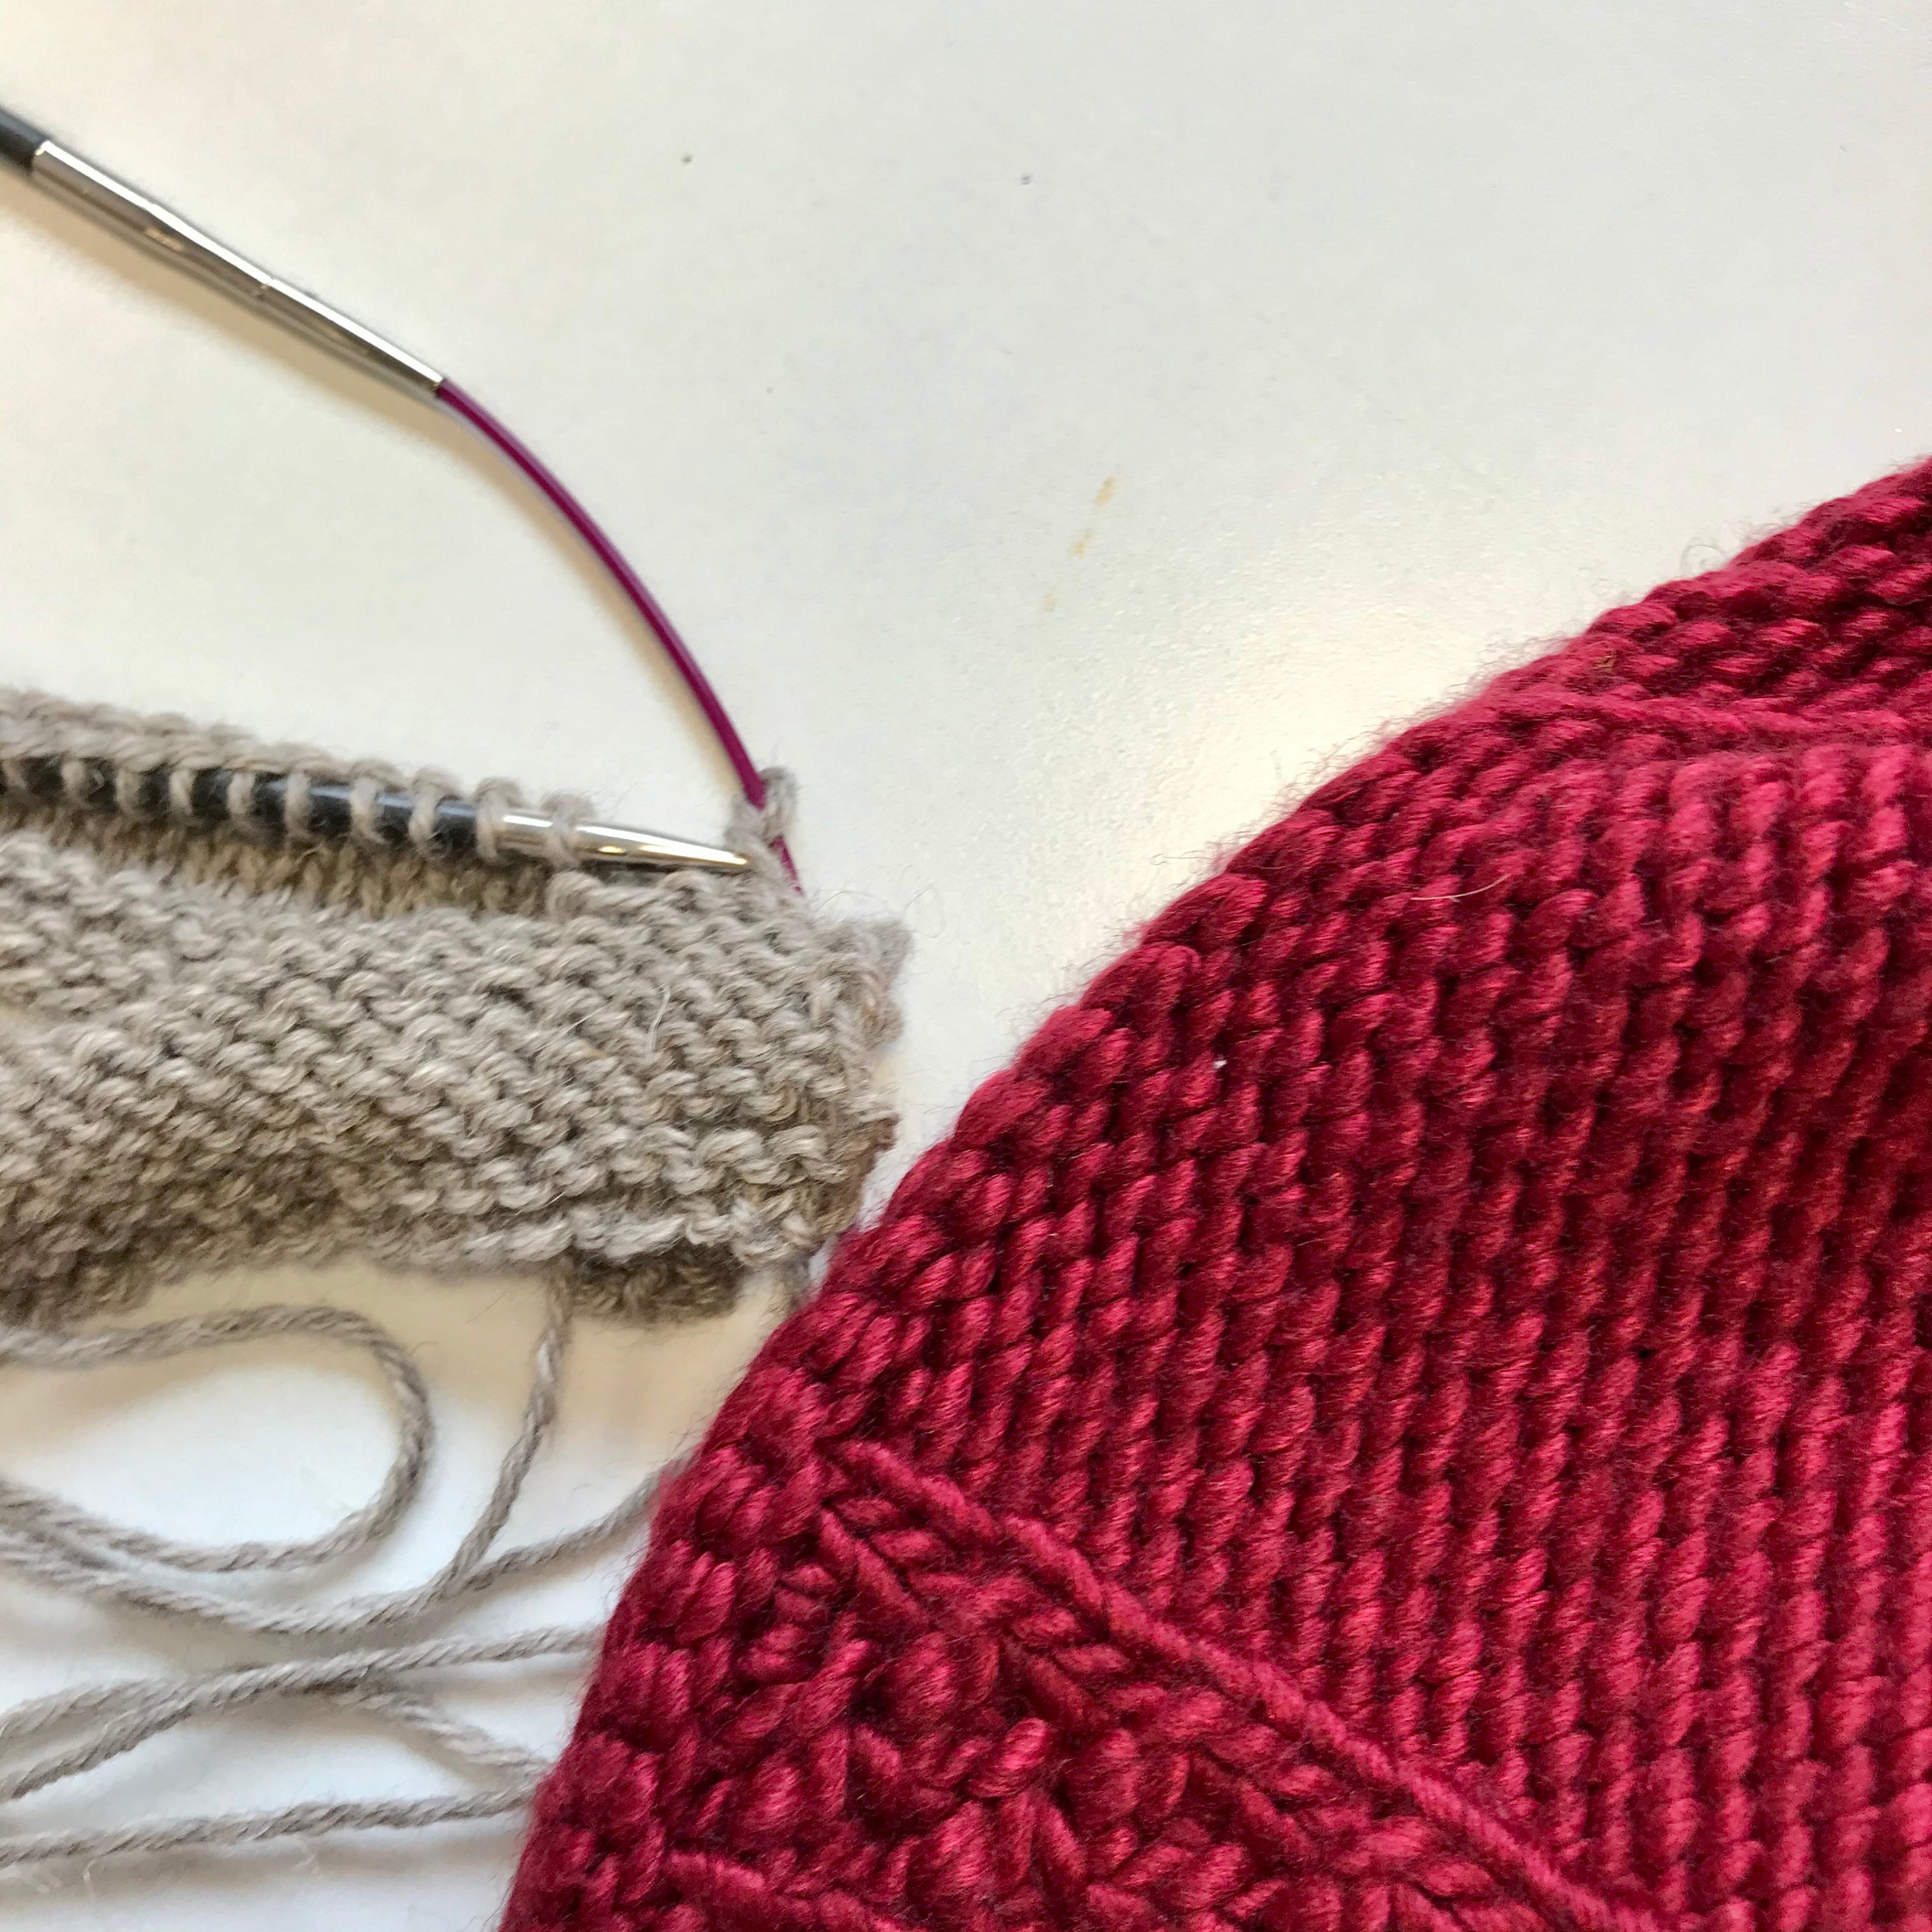 image of taupo and three needle bind off swatch being knit.